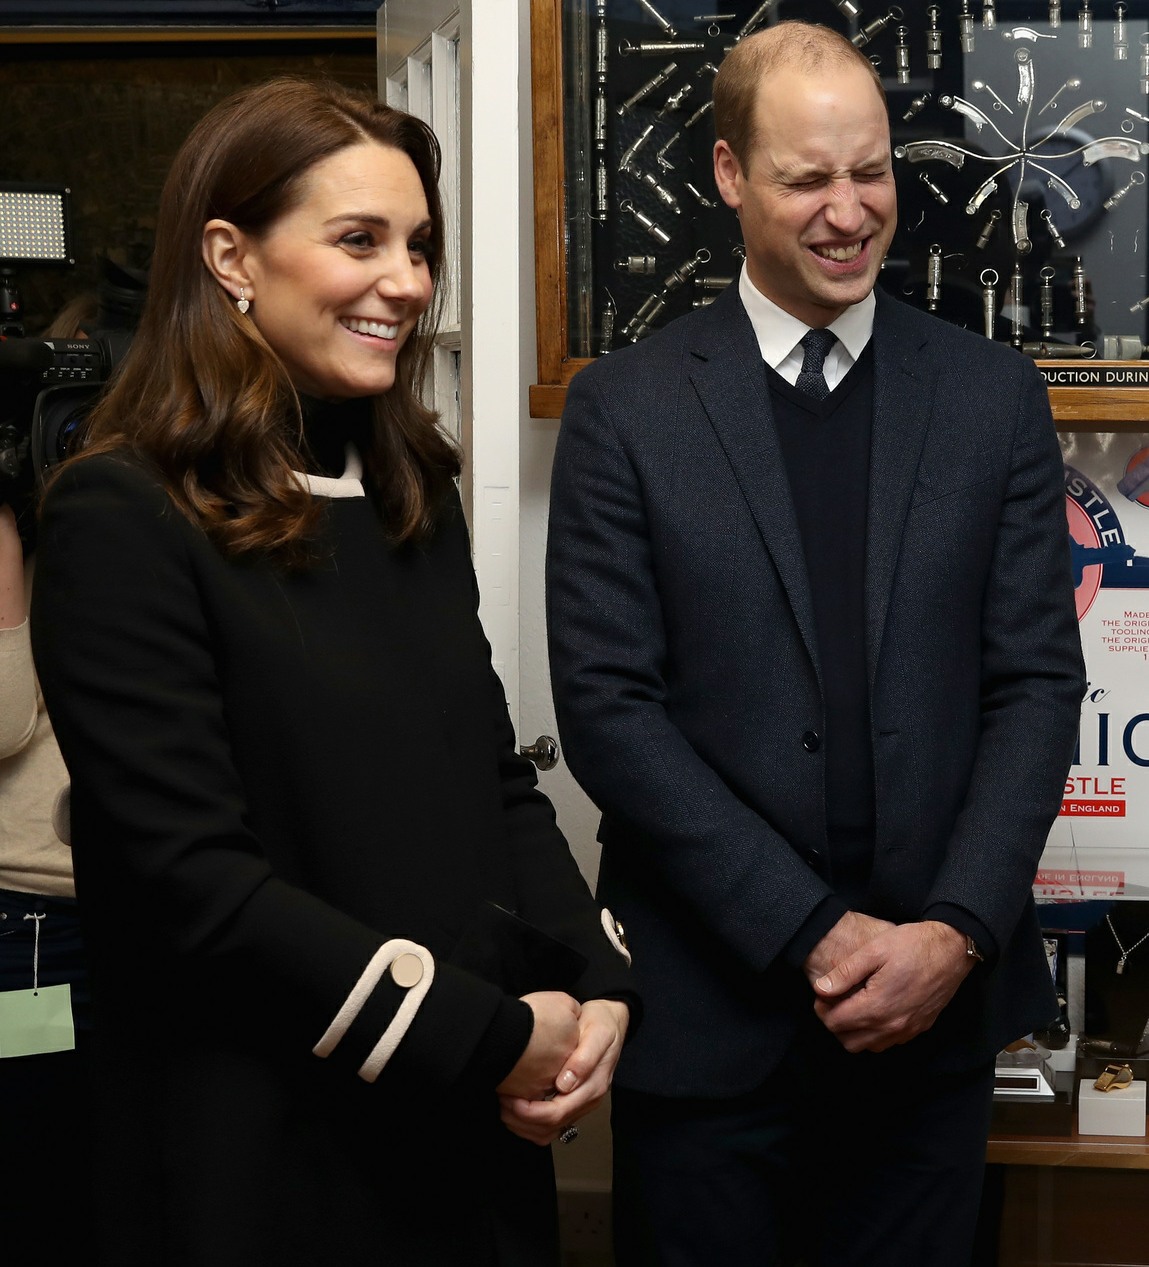 Duke and Duchess of Cambridge, William and Kate visit the Acme Whistles factory in Birmingham